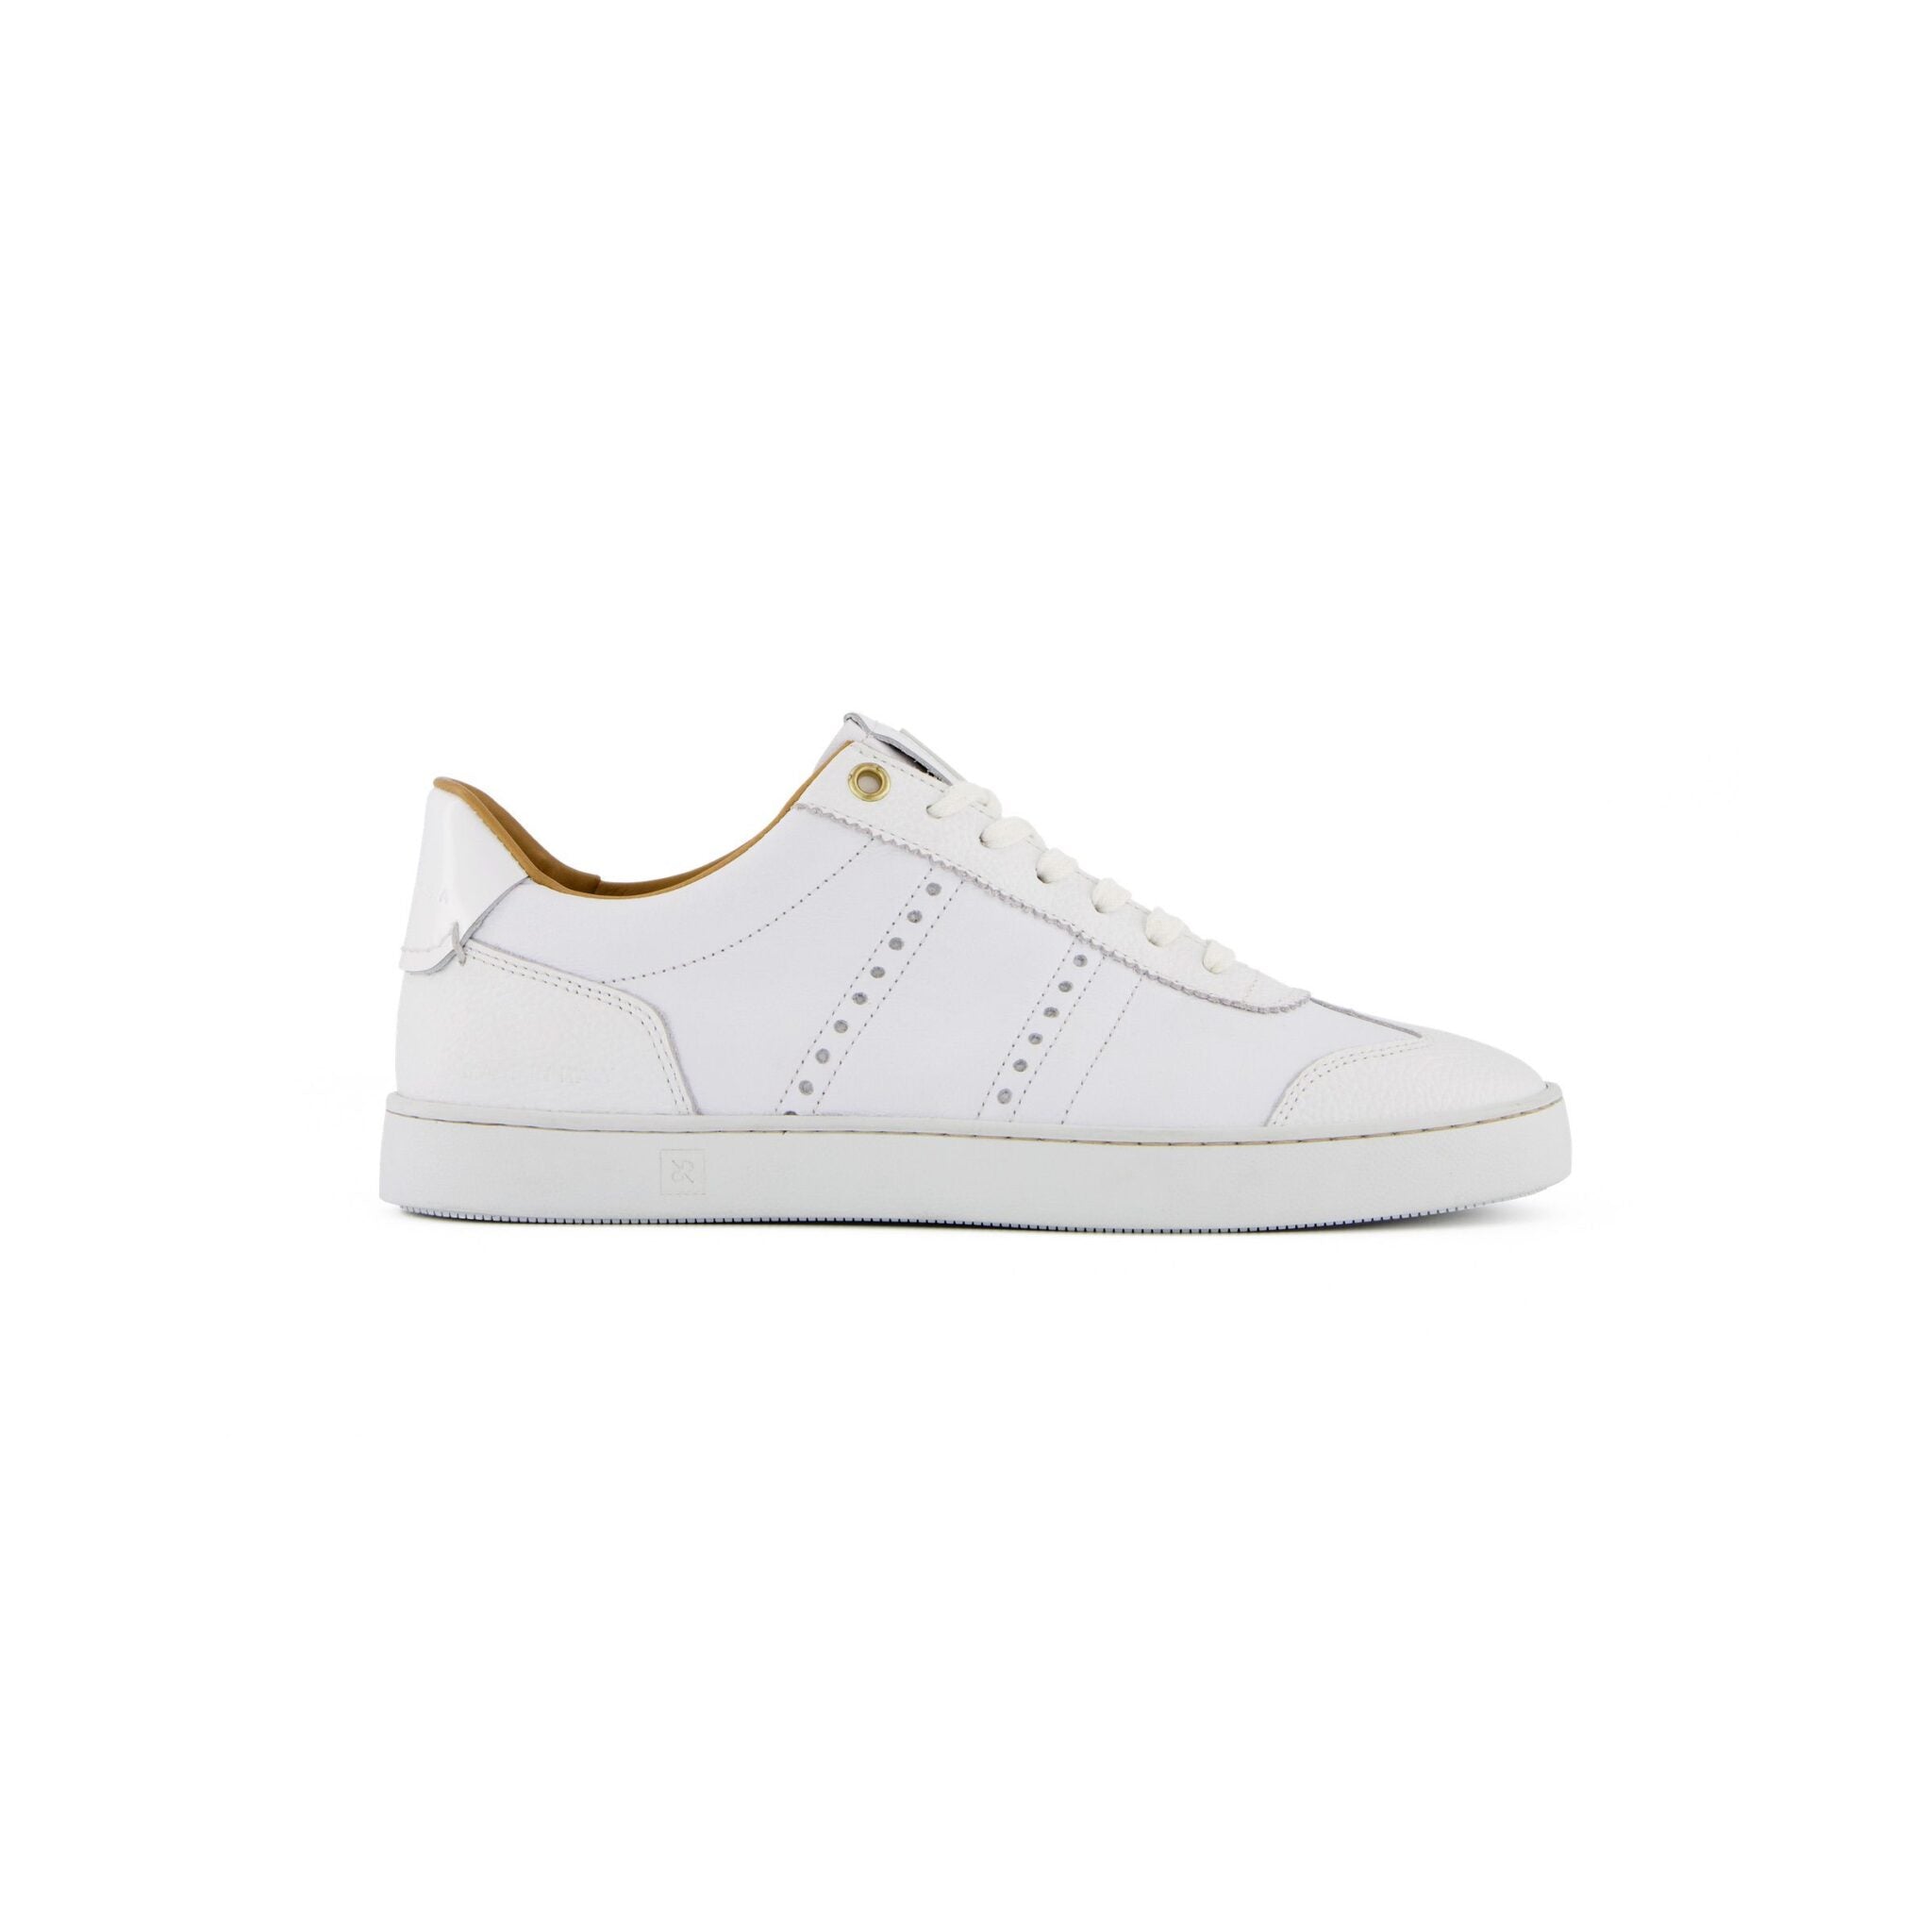 JUDY white CL03 men’s leather sneakers